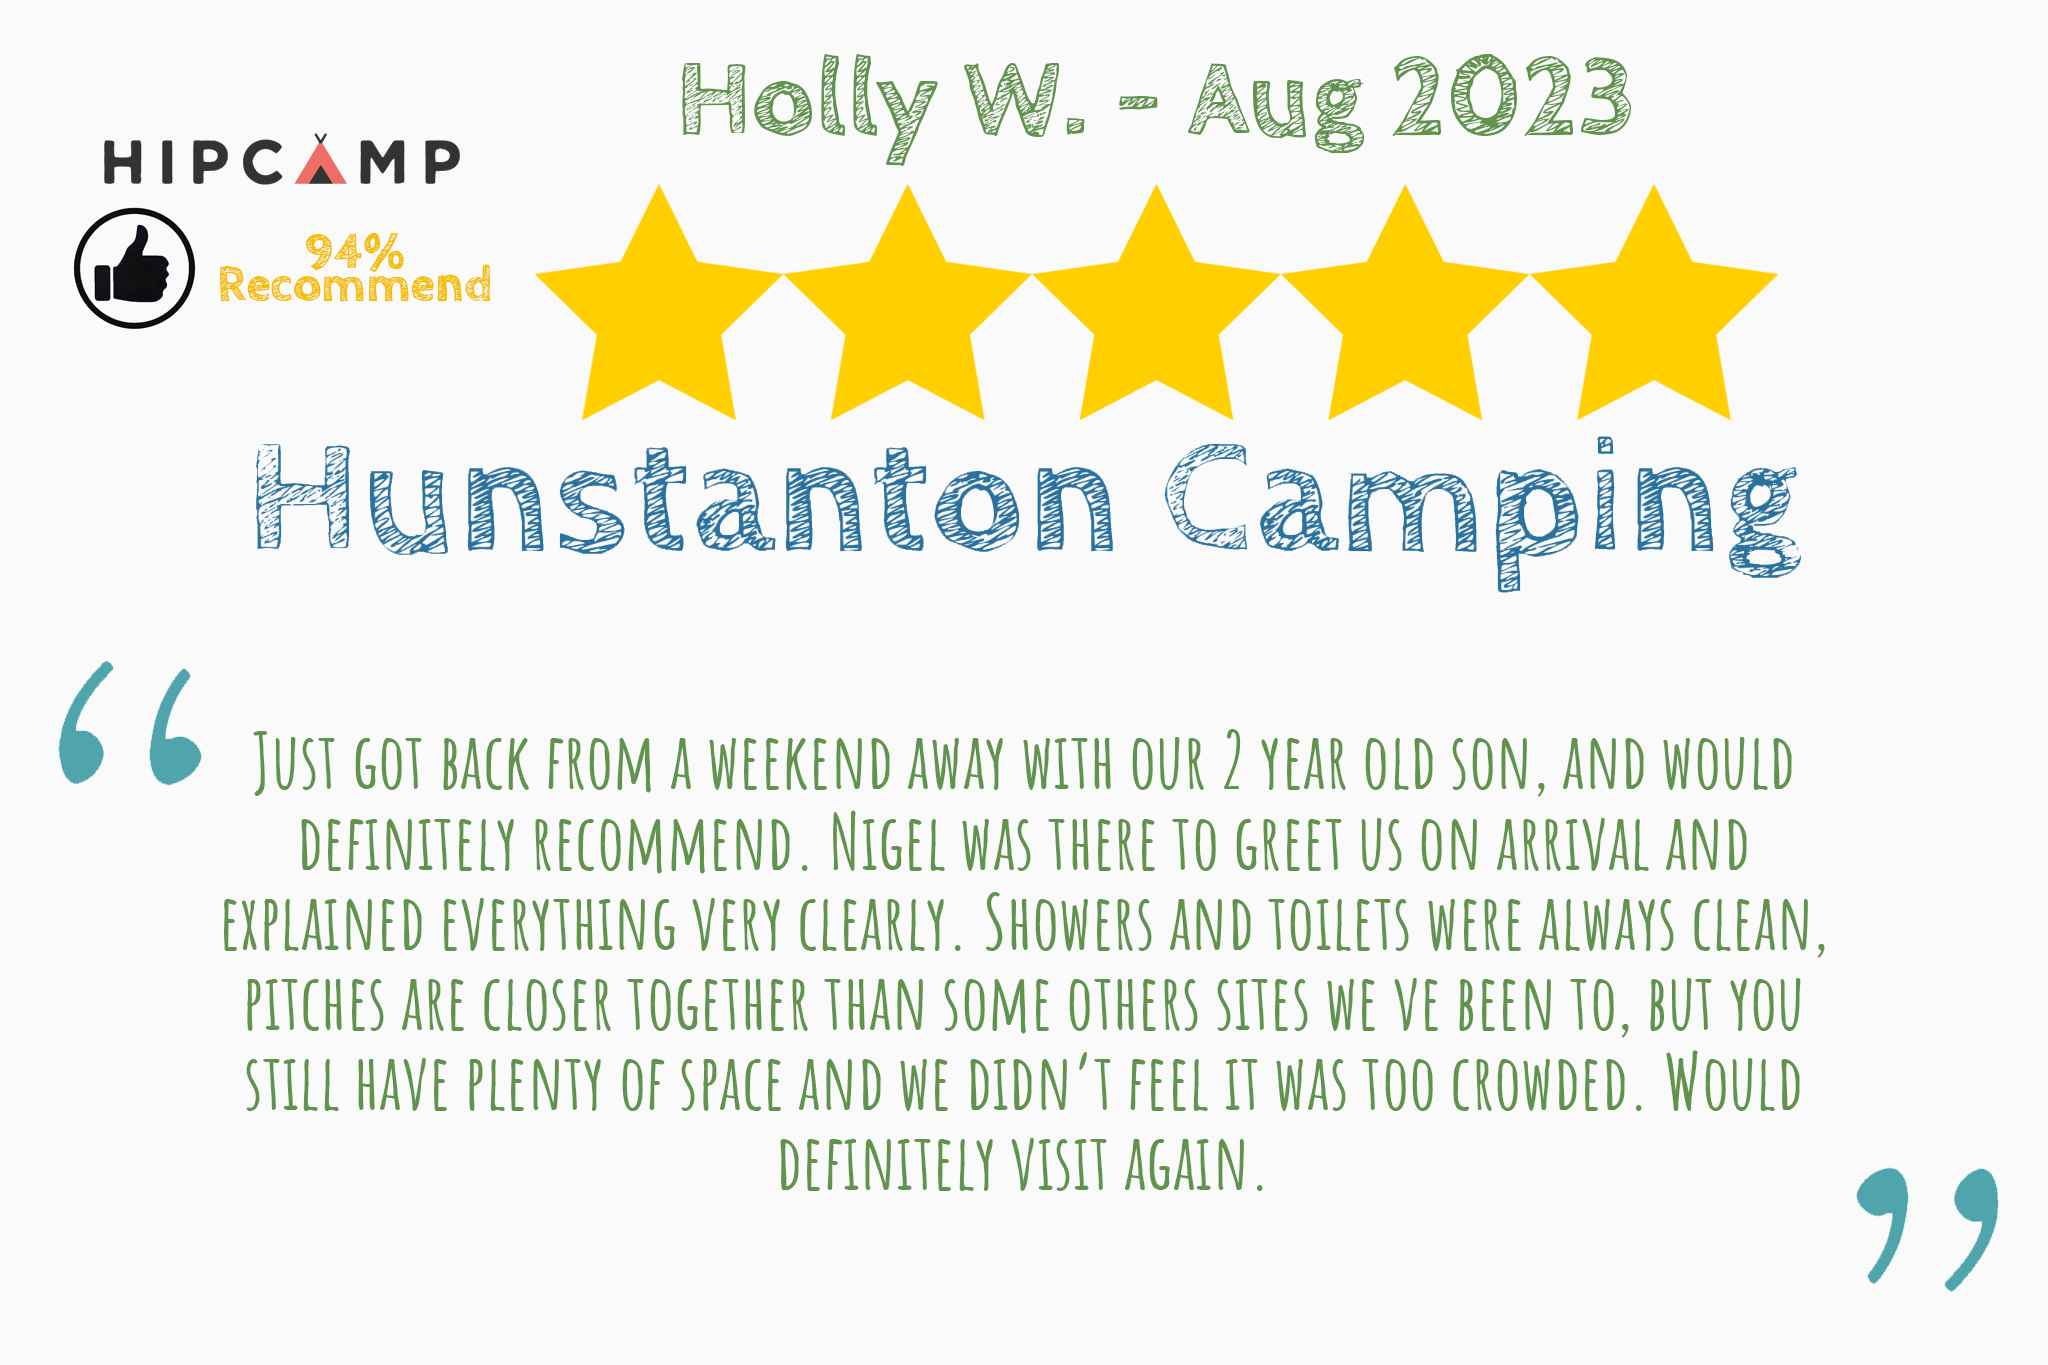 Recommended review from Holly W. on Hipcamp that says "Just got back from a weekend away with our 2 year old son, and would definitely recommend. Nigel was there to greet us on arrival and explained everything very clearly. Showers and toilets were always clean, pitches are closer together than some others sites we ve been to, but you still have plenty of space and we didn’t feel it was too crowded. Would definitely visit again."